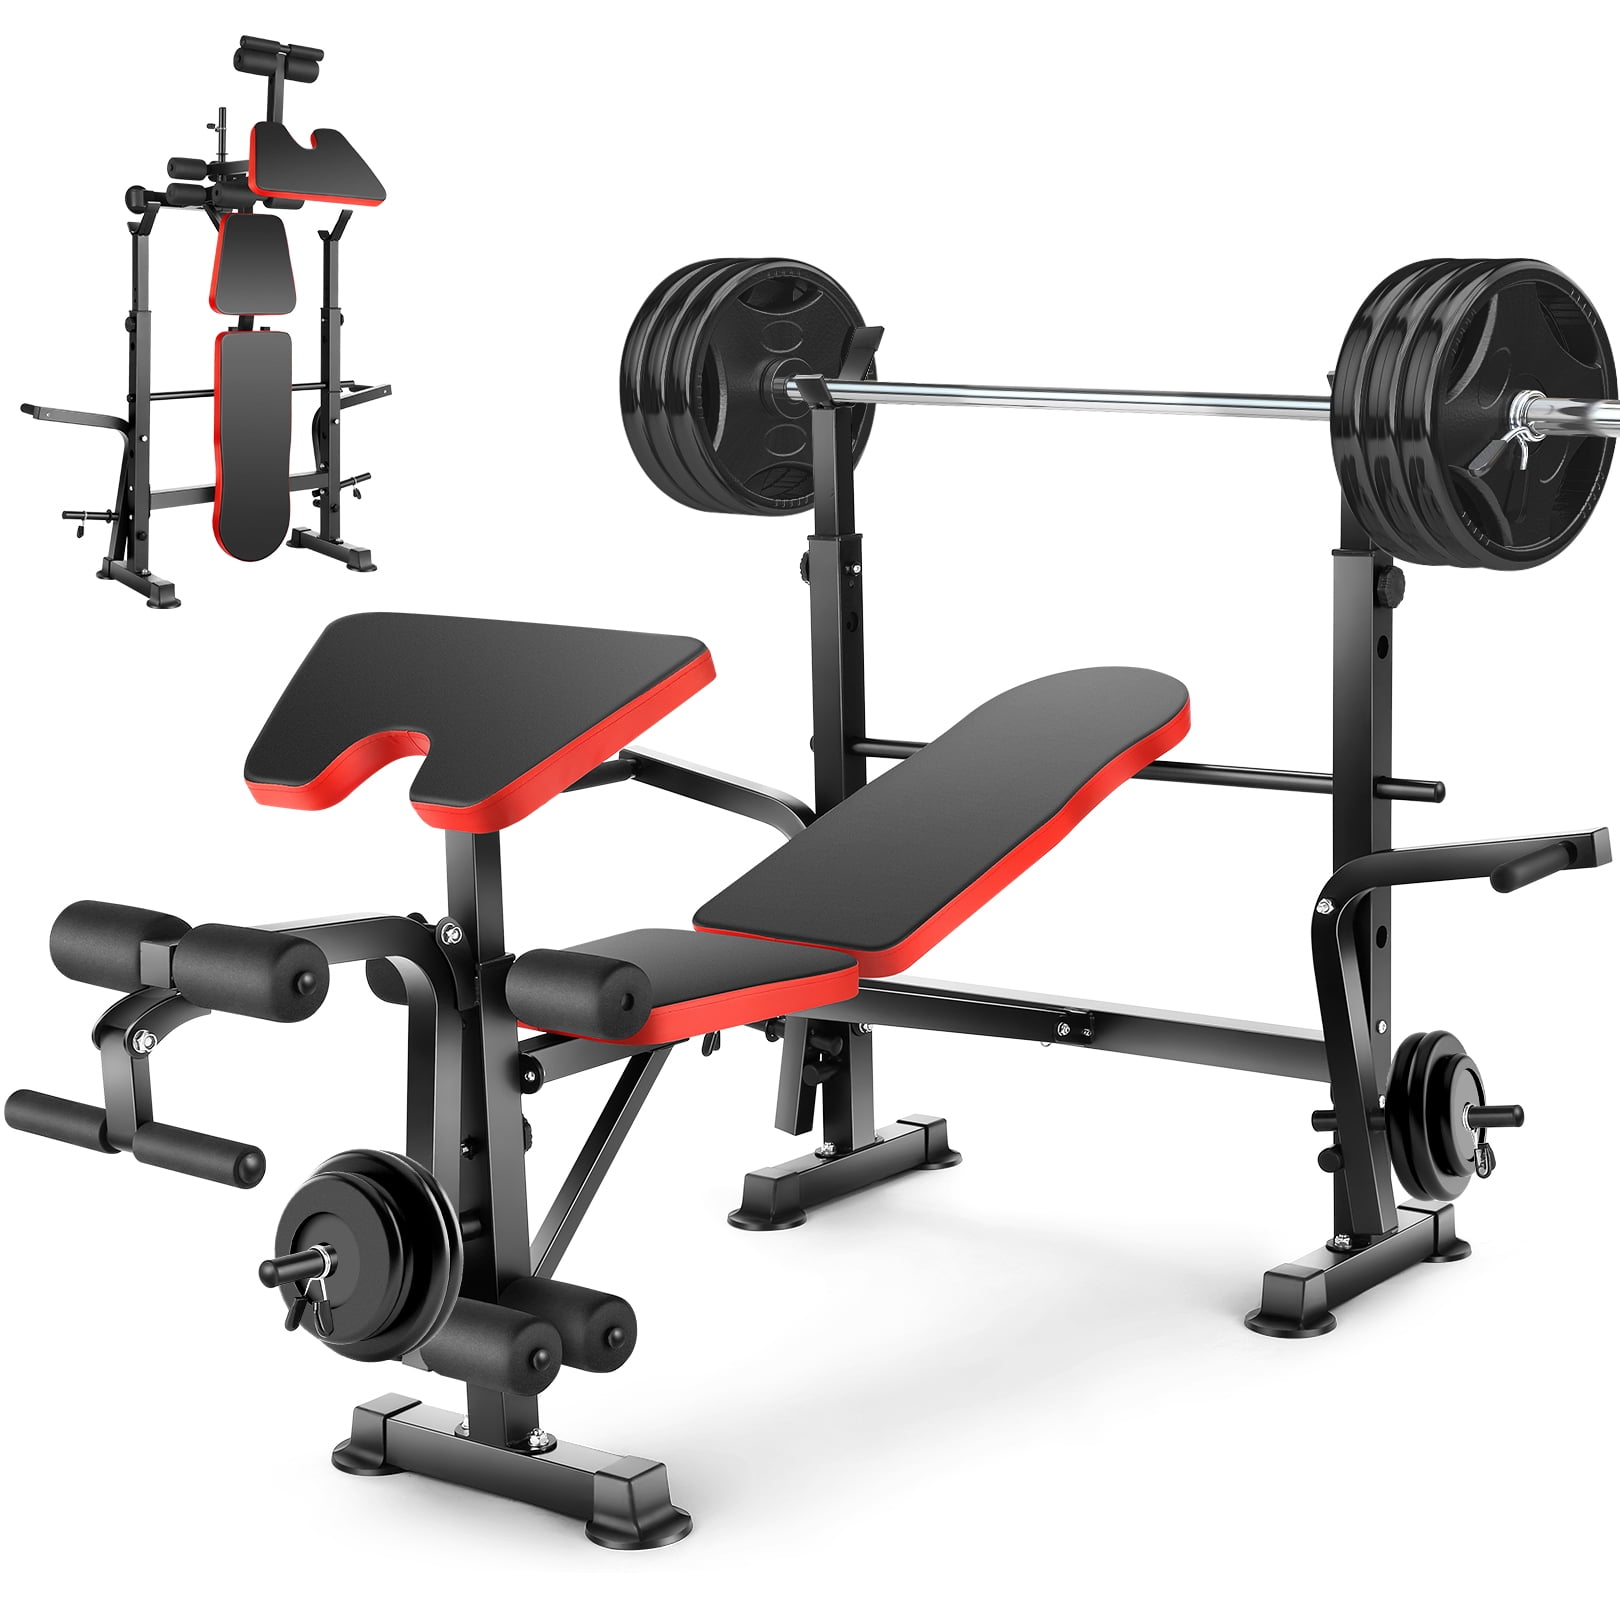 VIBESPARK Adjustable Weight Bench 600lbs 5-in-1 Foldable Workout Bench Set with Barbell Rack Leg Developer Preacher Curl Rack Dumbbell Fly Attachment, Multi-Function Strength Training Bench Press - image 1 of 10